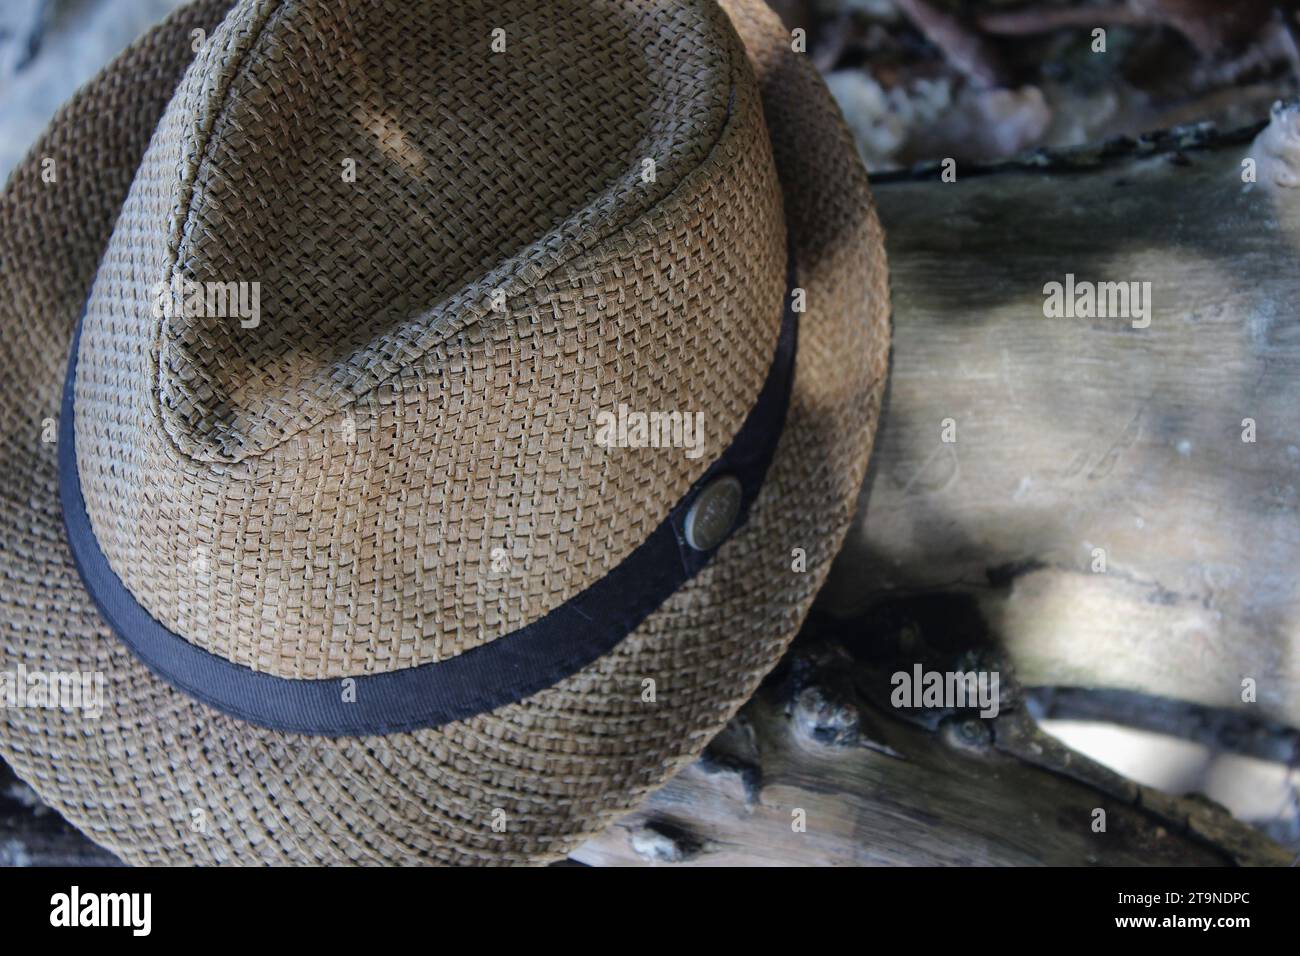 Rustic straw or natural fiber hat, beige, with a black fabric ribbon sewn as an ornament between the crown and brim of the hat, on a tree trunk. Stock Photo